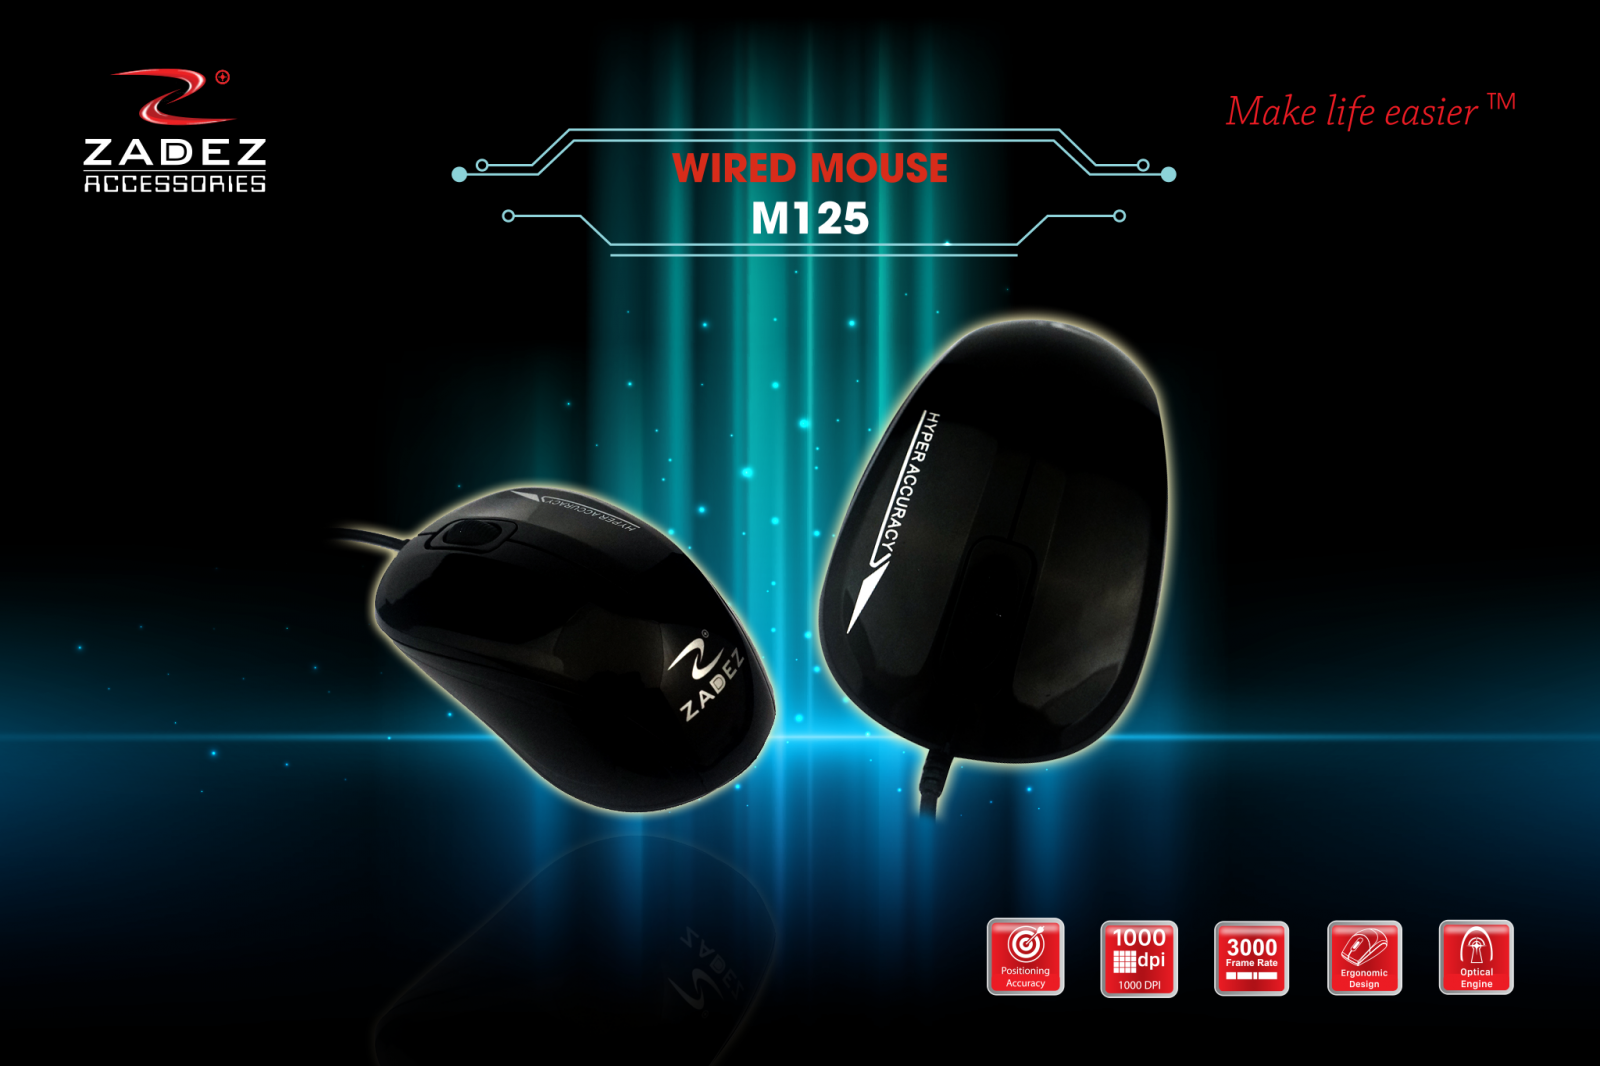 Chuot co day Wired Mouse Zadez M125